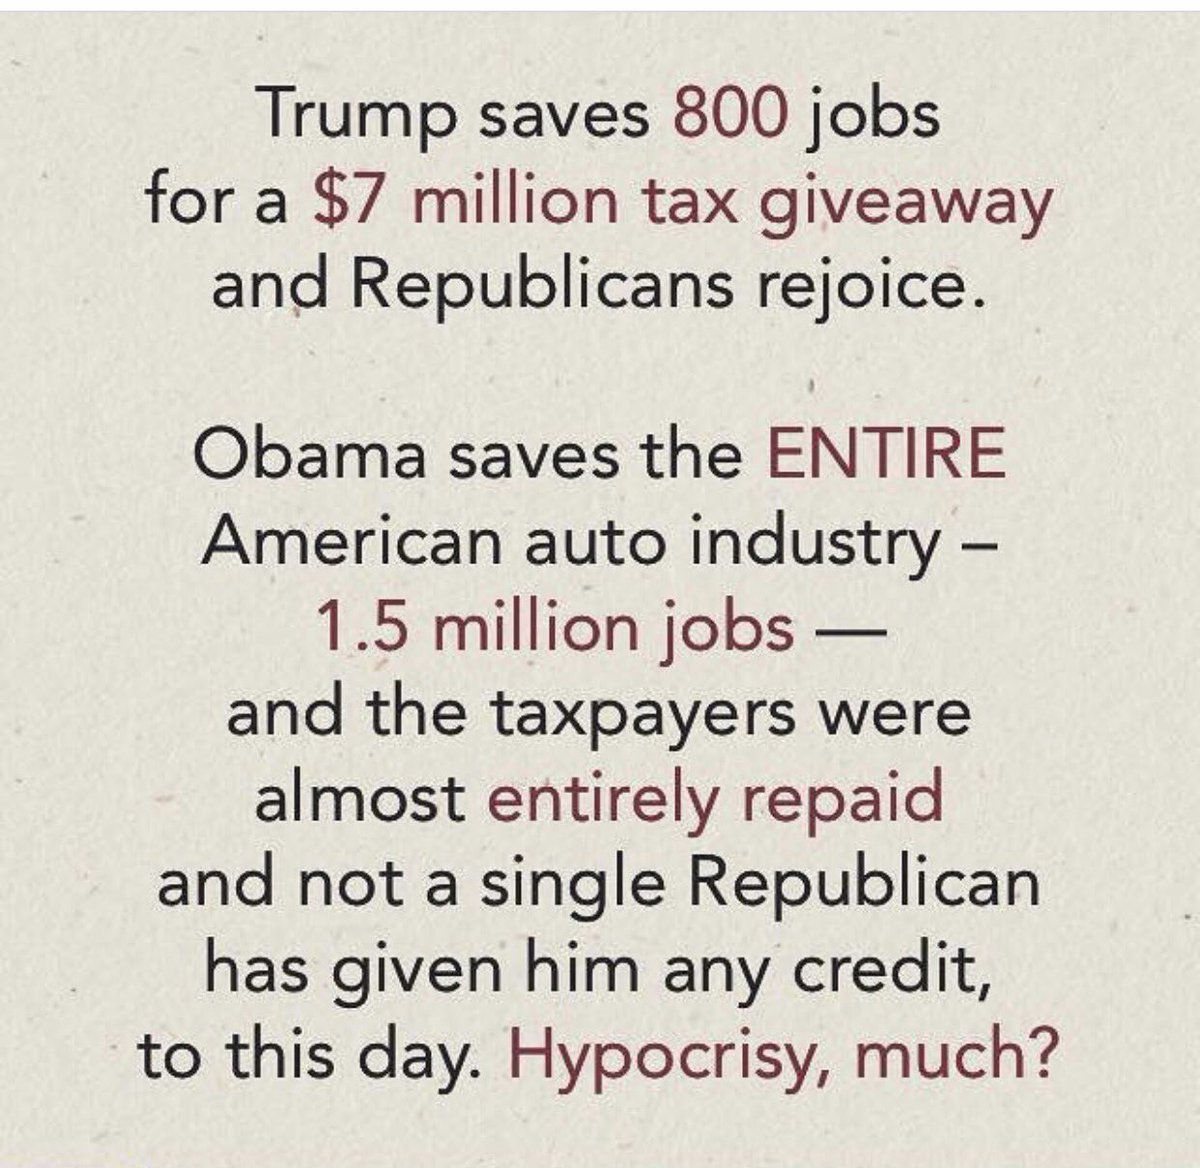 CAR estimated that a complete shutdown of the industry that was bailed out in 2009 would have resulted in the loss of 2.63 million jobs and those losses would still have stood at more than 1.5 million in 2010.  #DemHistory  #WhyIVoteDemocrat